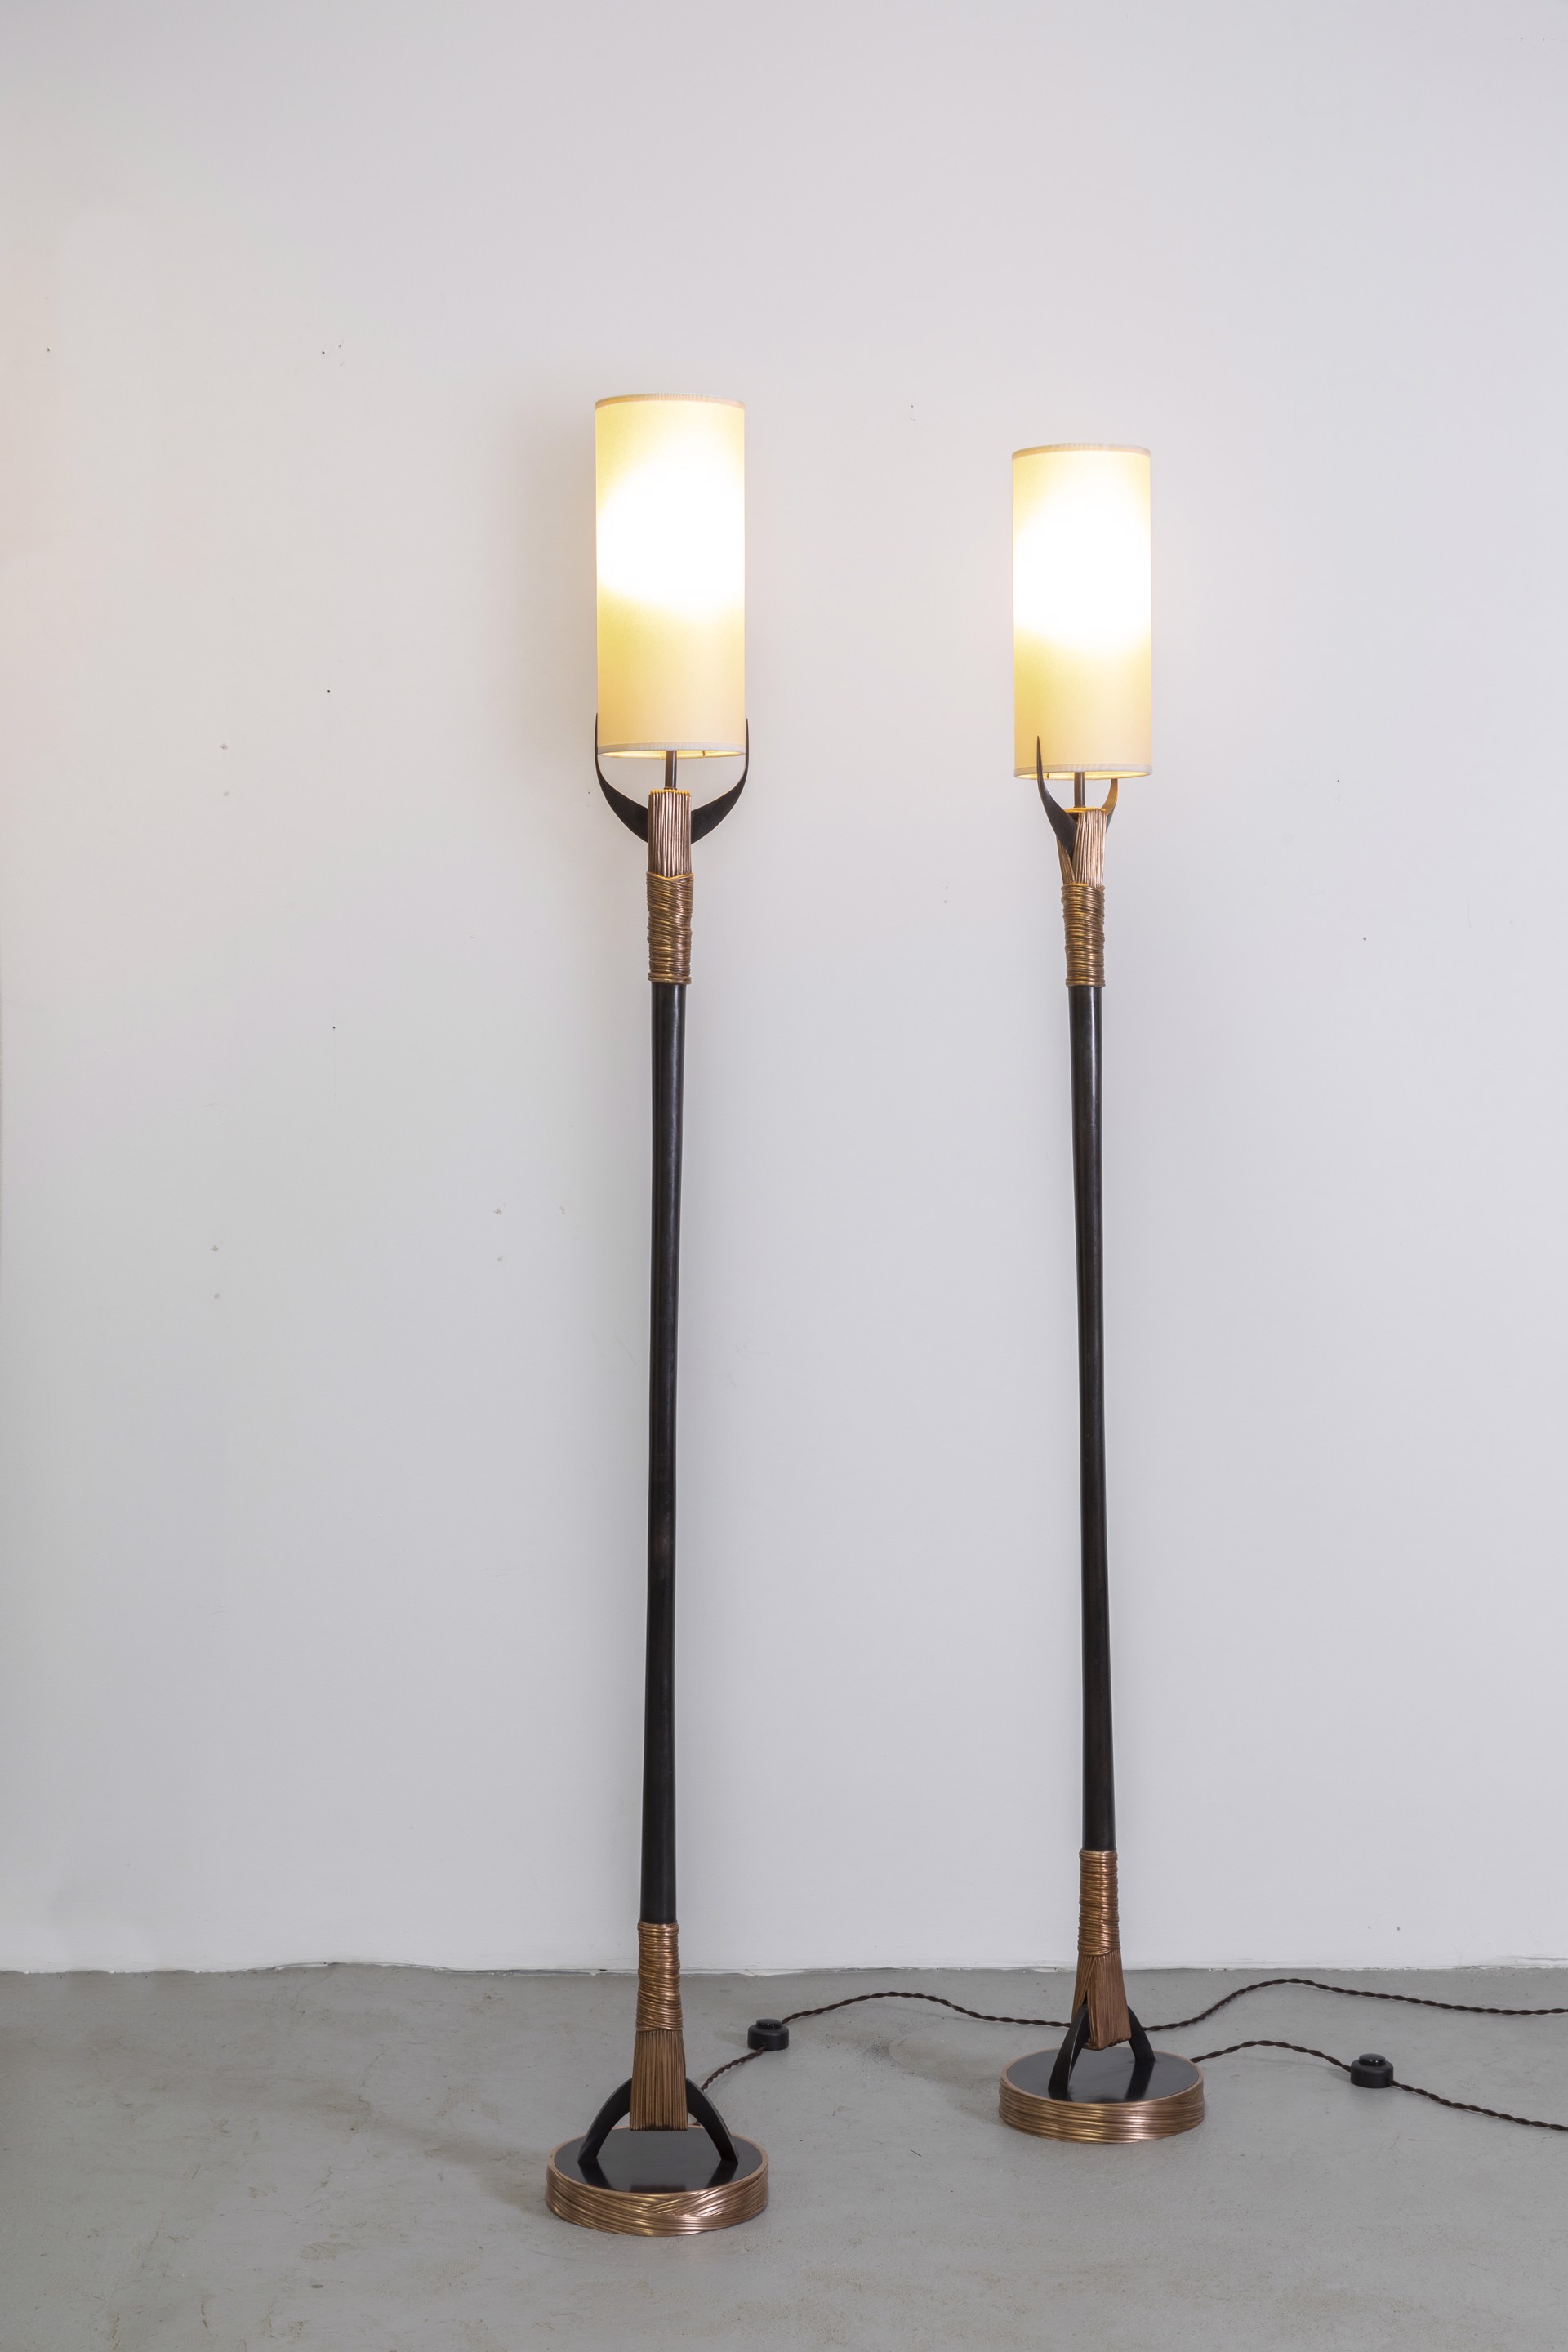 Floor lamp with textured bronze by Anasthasia Millot